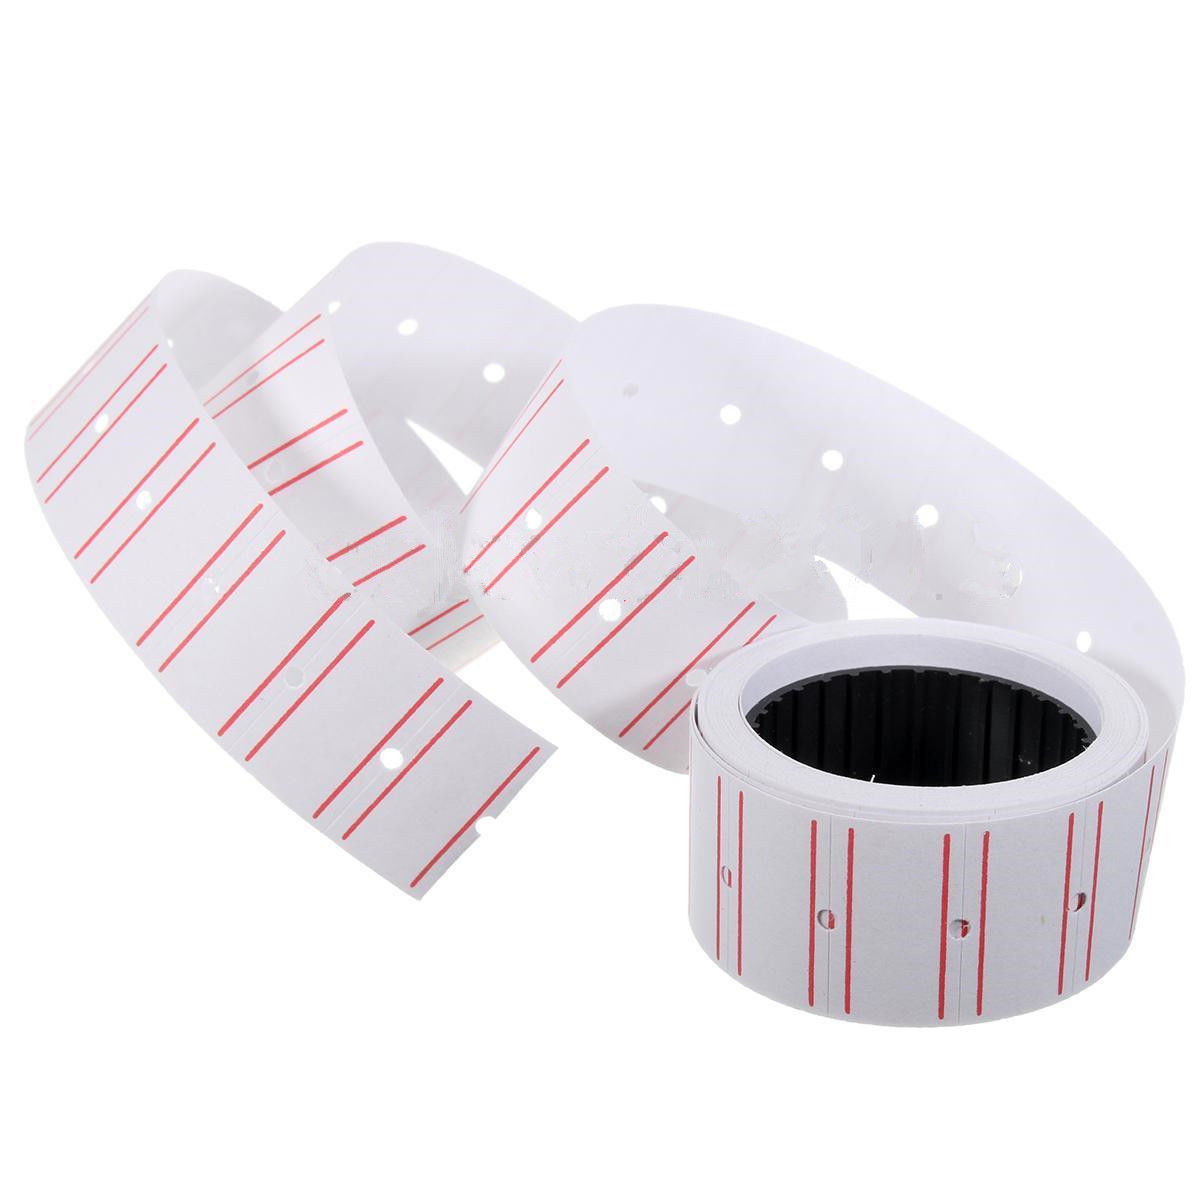 10PCS Adhesive Price Labels Paper Tag Price Label Sticker Single Row For Price Gun Labeller Suitable For Grocery 21mmX12mm